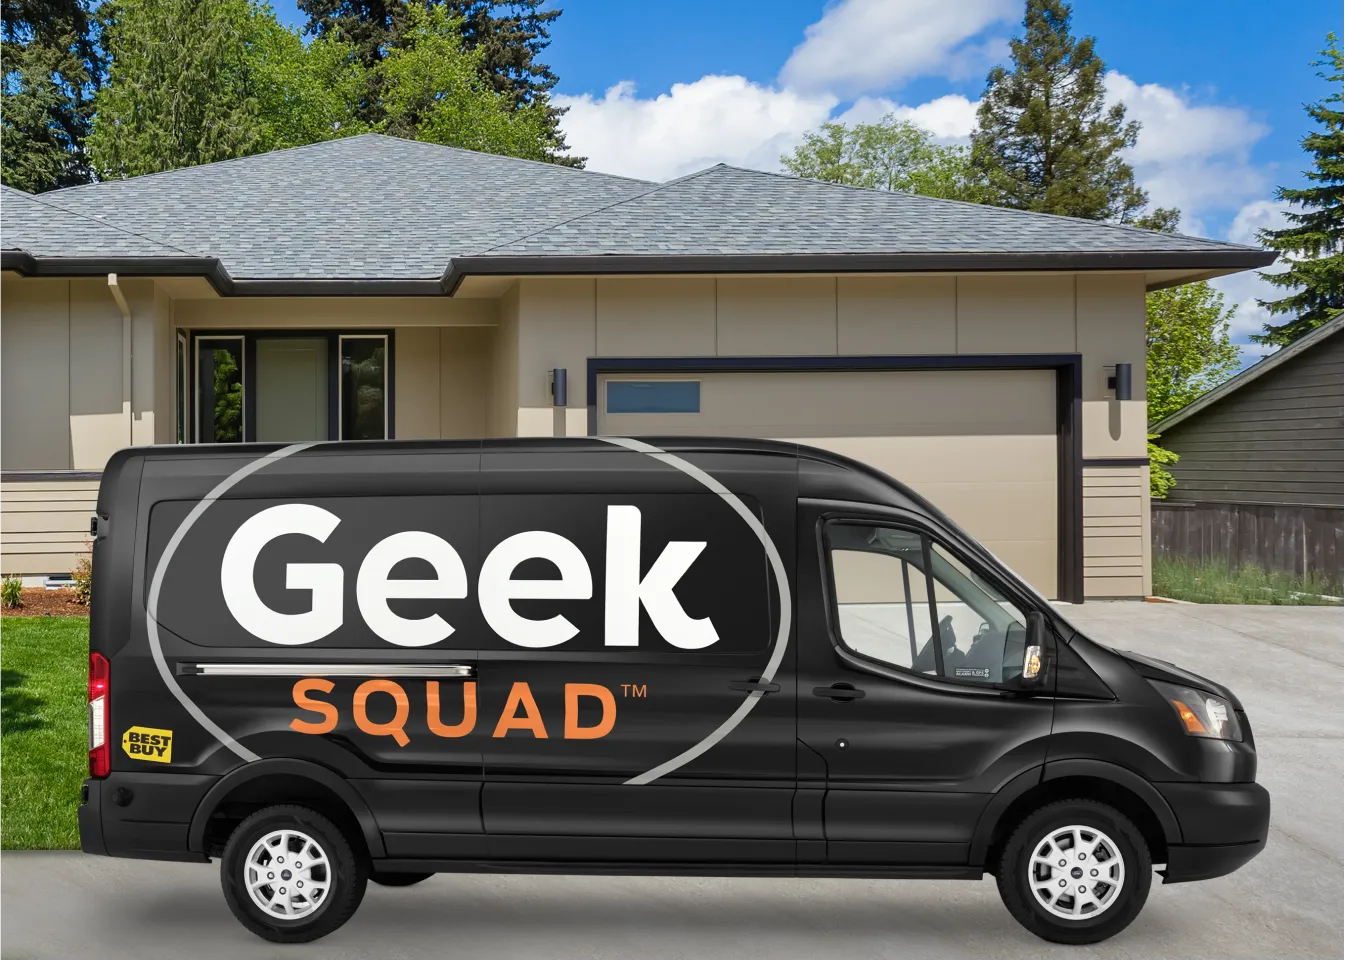 A Geek Squad van parks in front of a nice house.